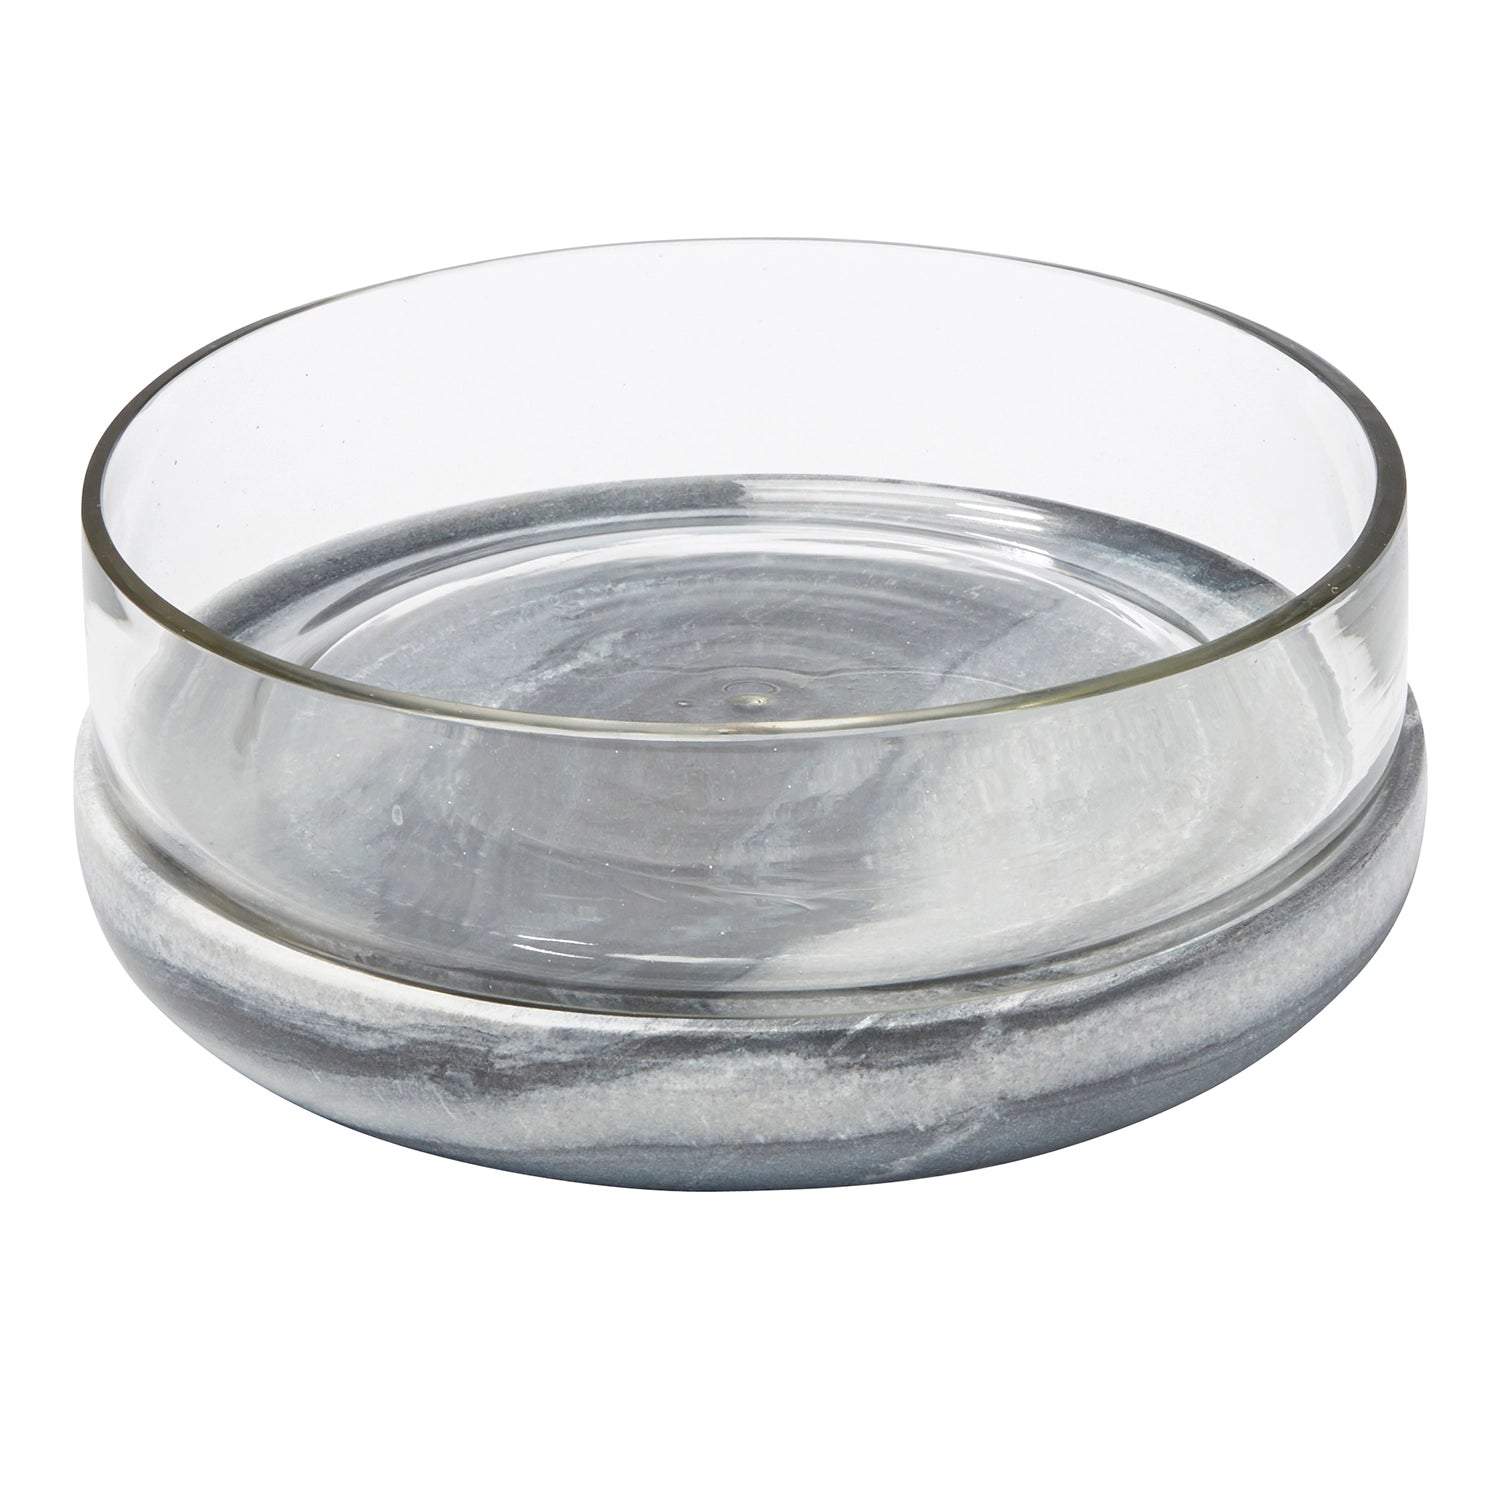 Grey Marble and Glass Bowl - Home Works